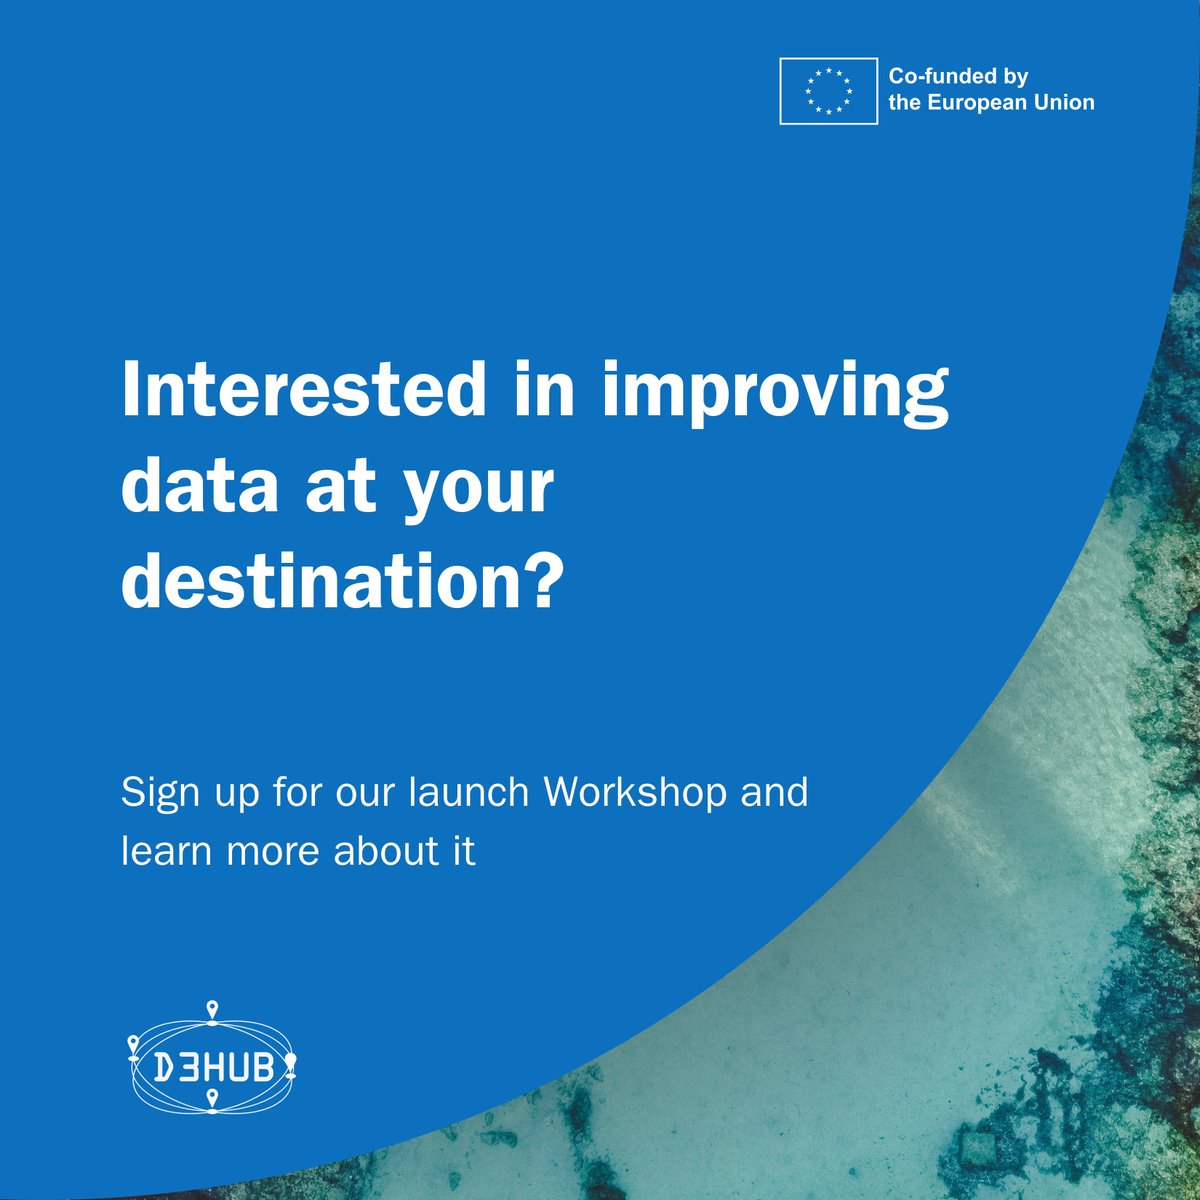 🔎 Do you want to optimise data management in your tourism destination? Join our launch Workshop and find out how to drive efficiency and growth in your tourism sector

🗓️23 April
🕚 11:00 CET
👉 Register here: lnkd.in/d6H-wxMr

#competencecentre #datasharing #datahubs